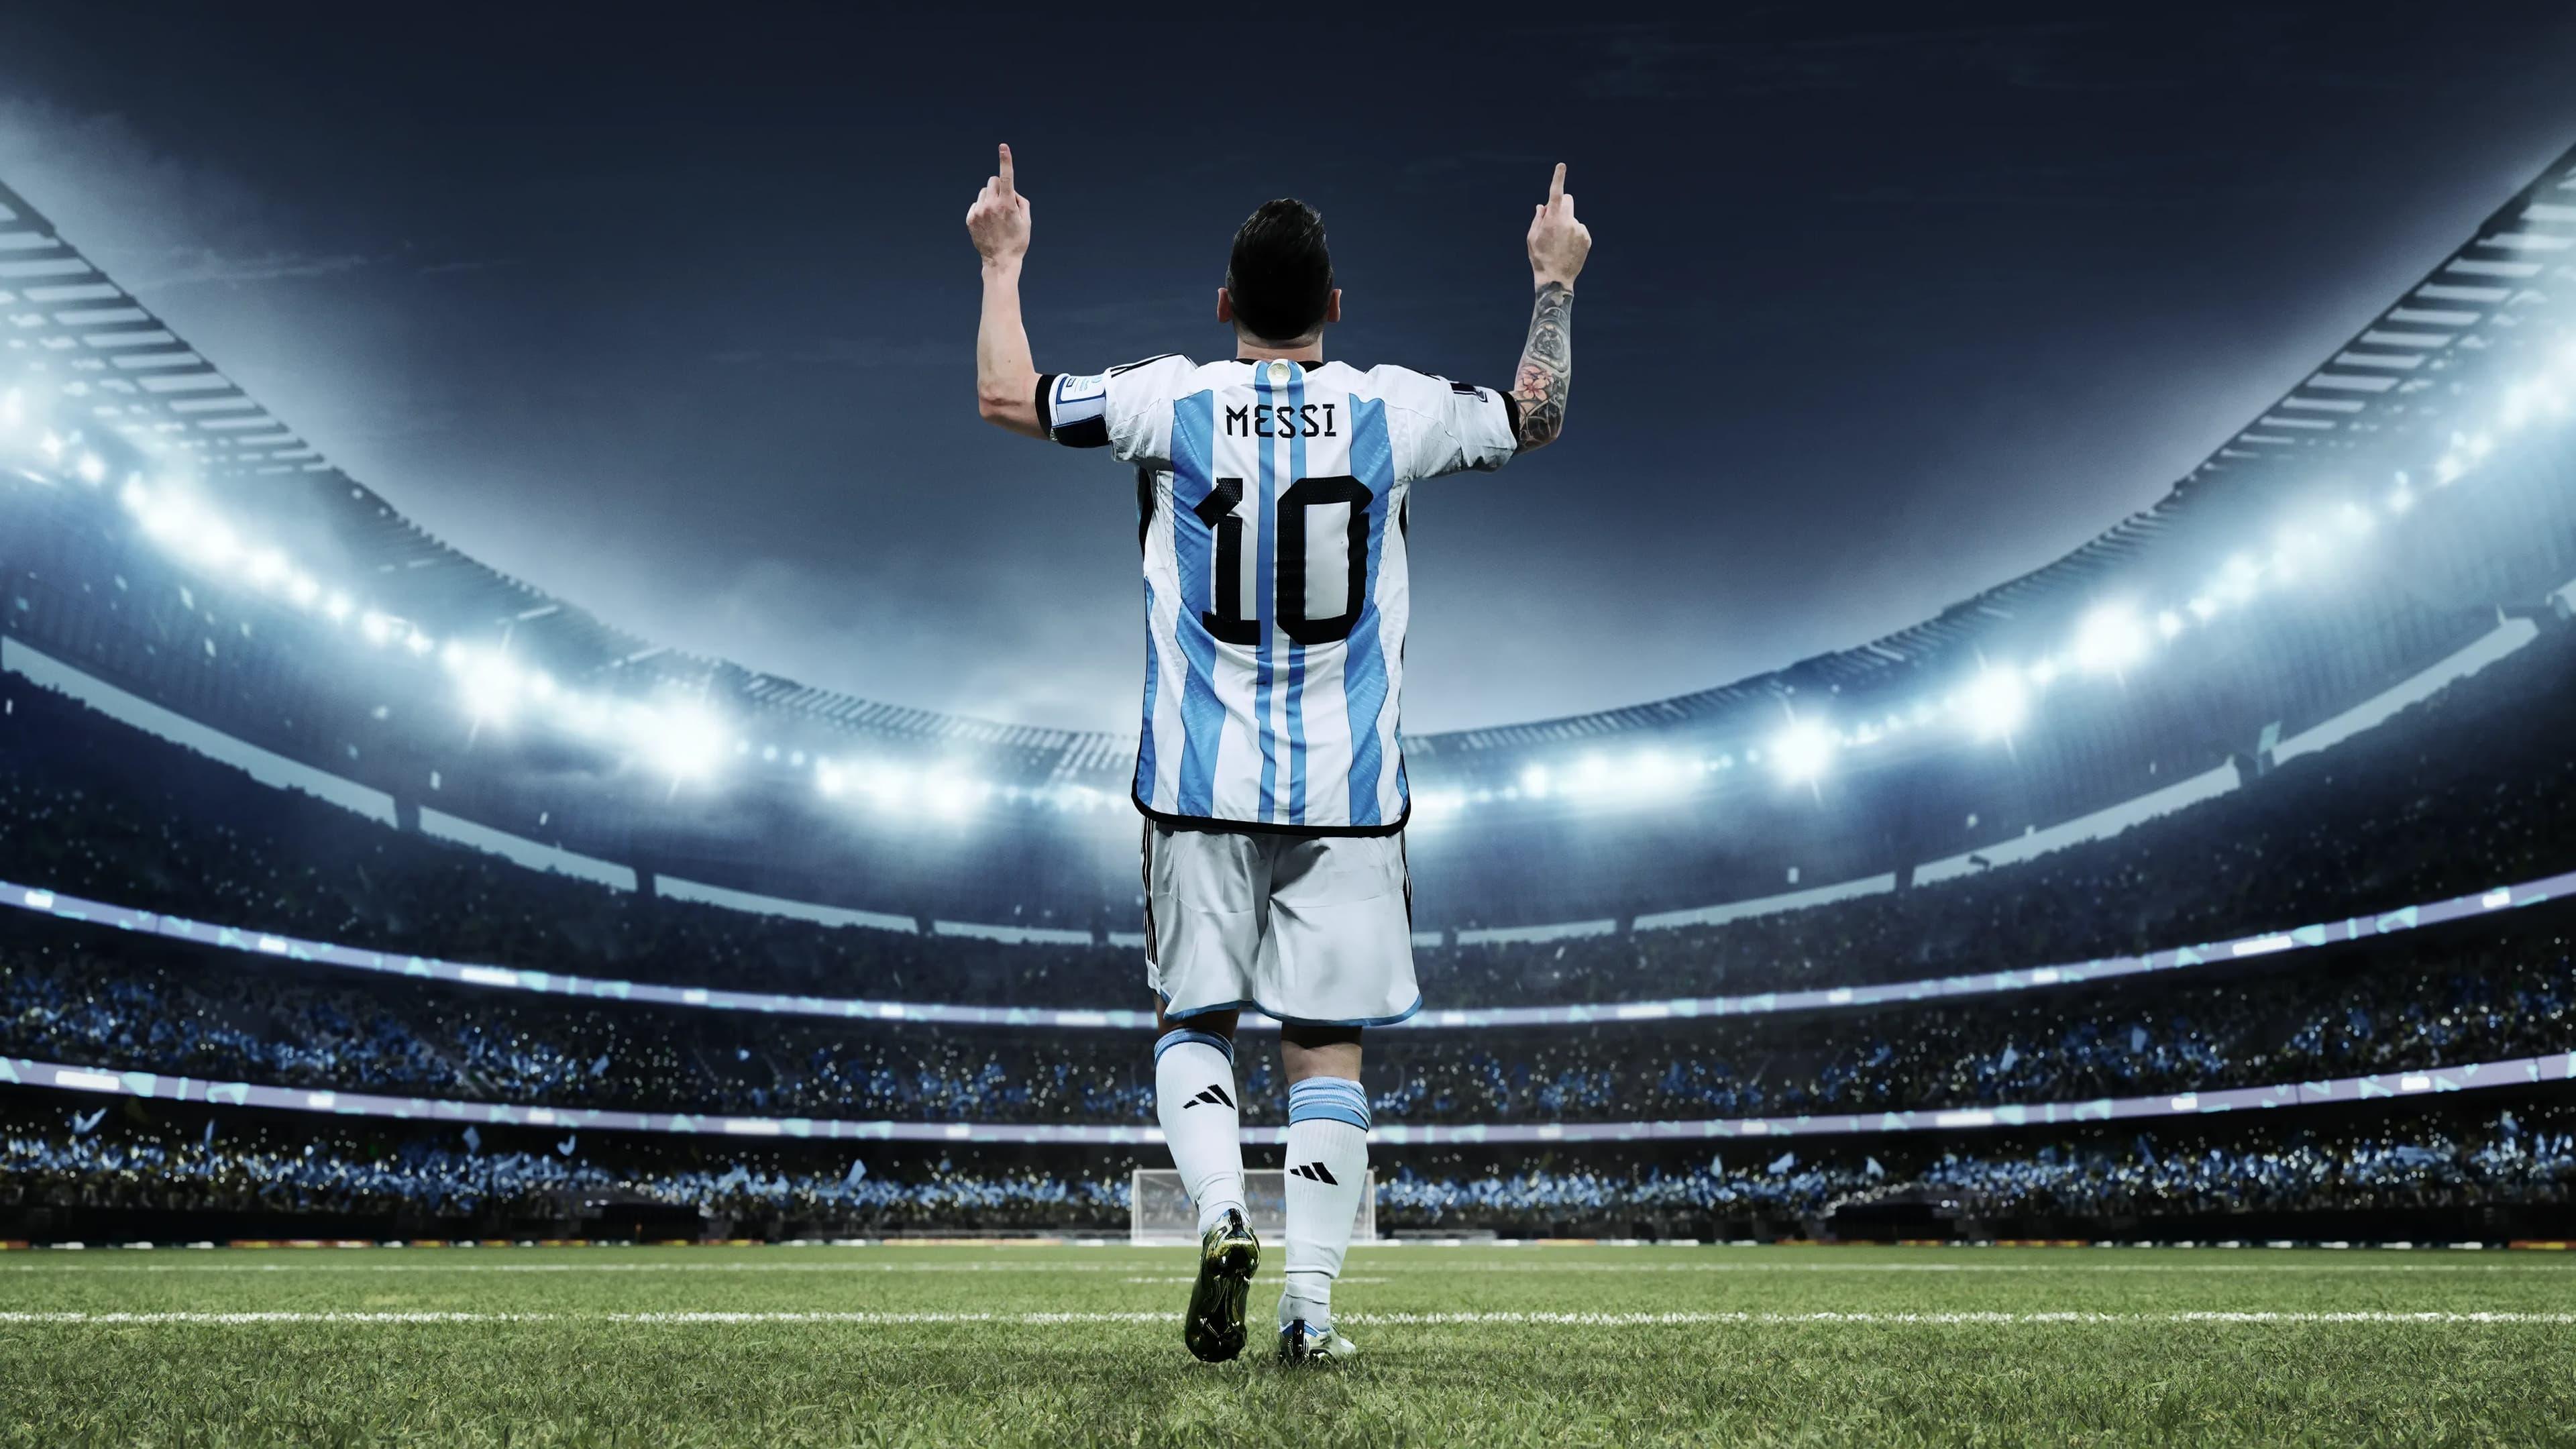 Messi's World Cup: The Rise of a Legend backdrop